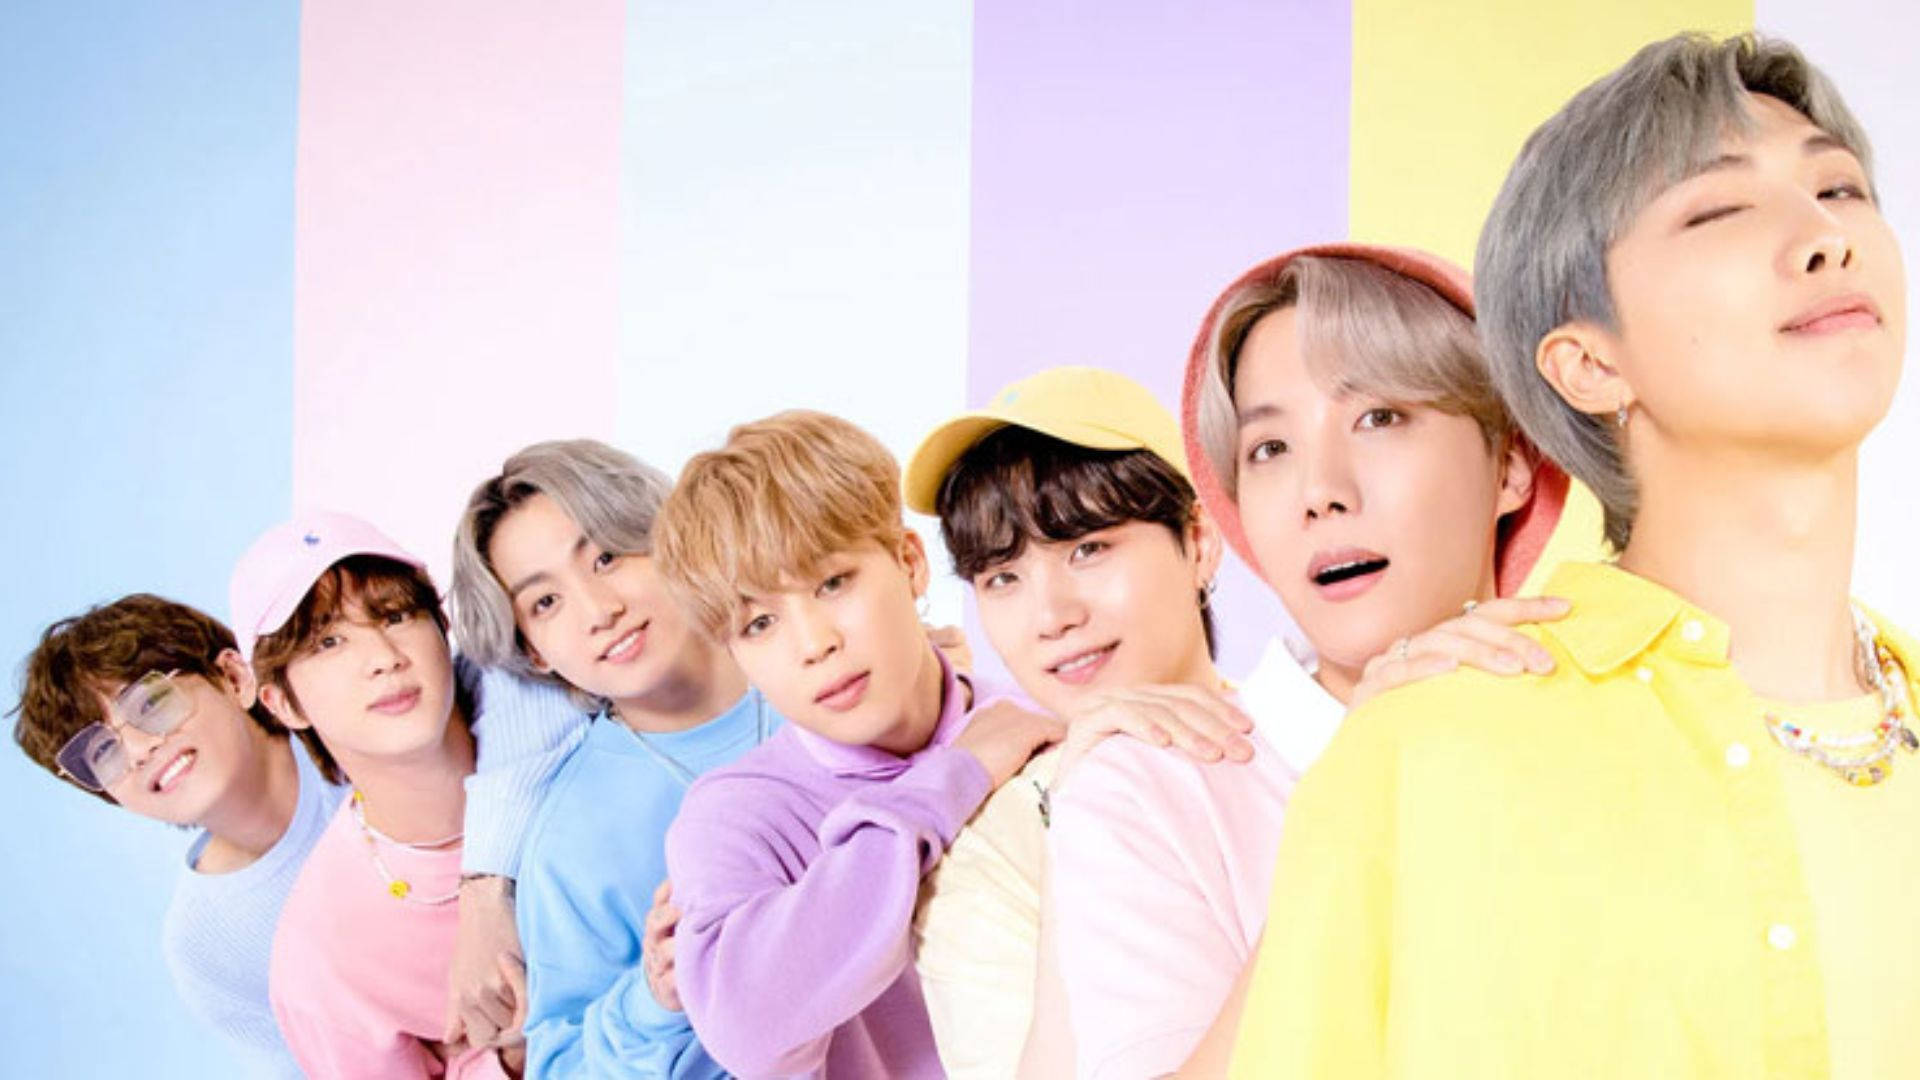 Pastel Outfit And Background Bts Cute Aesthetic Wallpaper